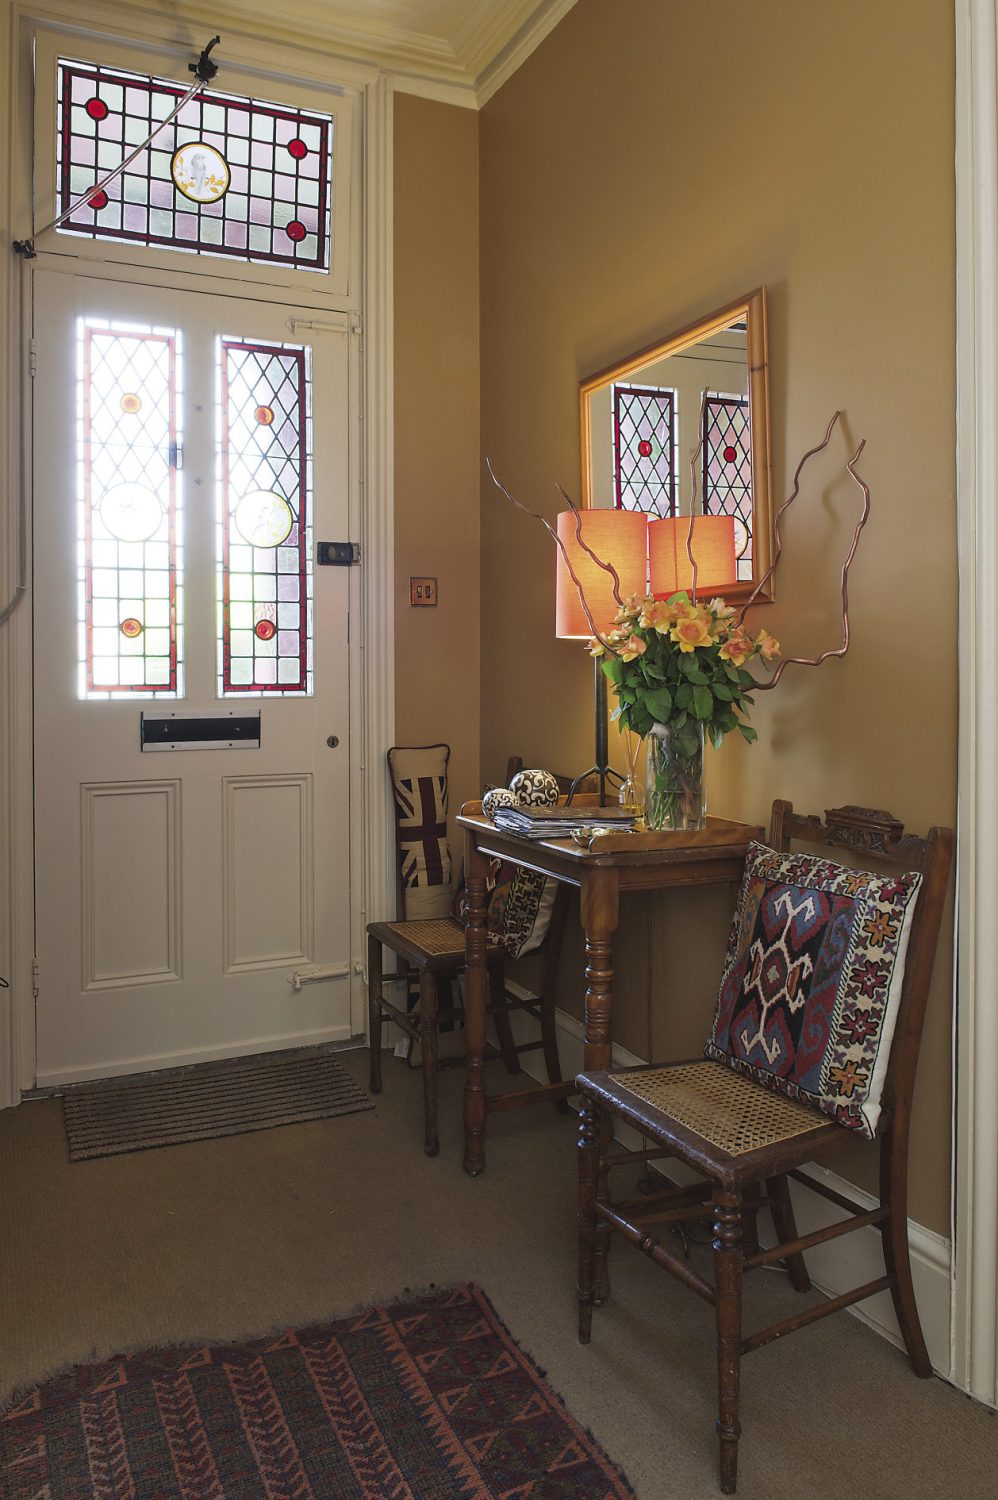 The inviting glow of the colours used in the hallway combined with the stained glass panels, provides a warm welcome to Ann Edwards’ Victorian villa